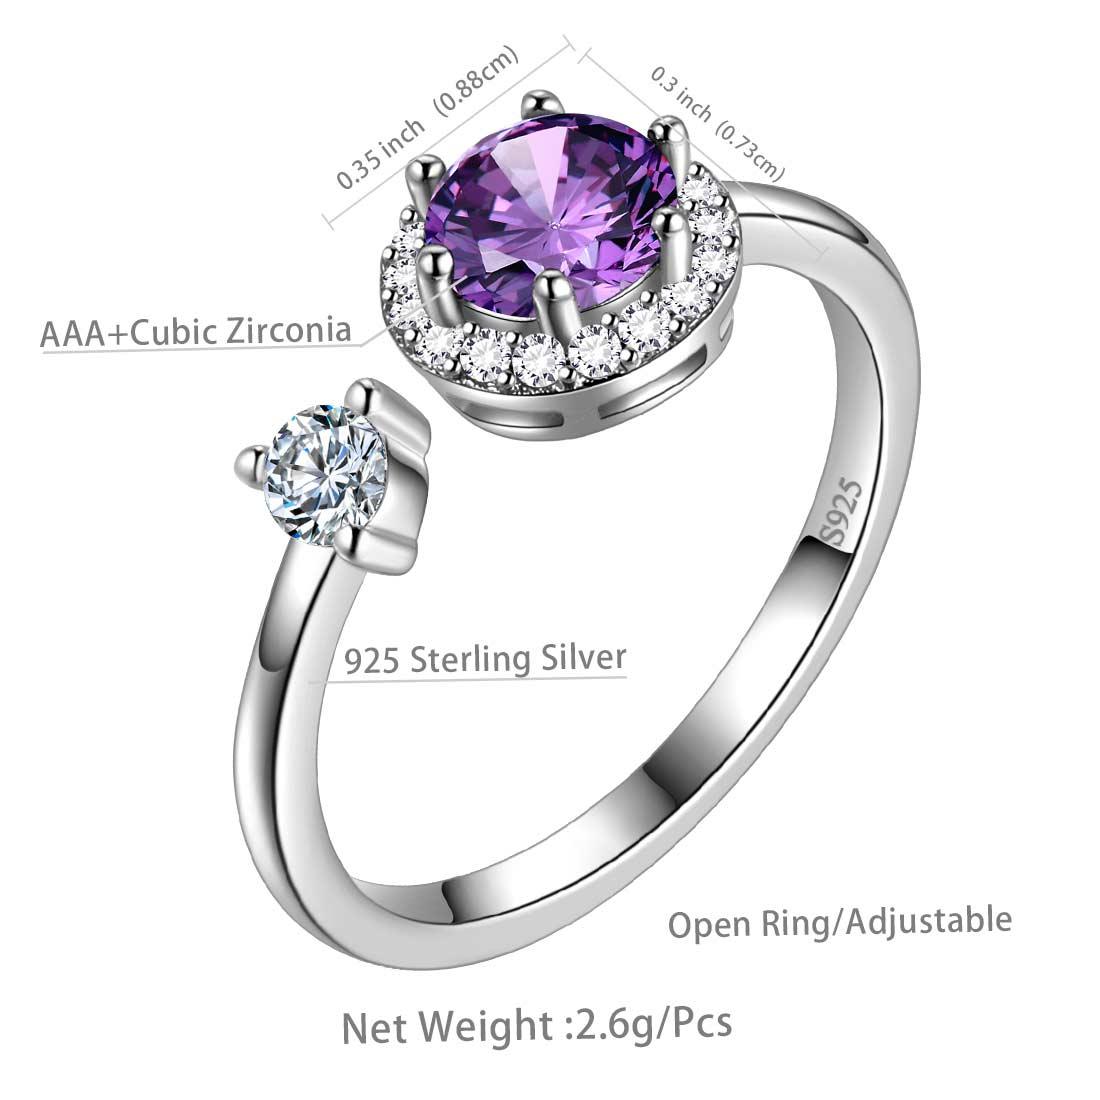 Round Birthstone February Amethyst Ring Open Sterling Silver - Rings - Aurora Tears